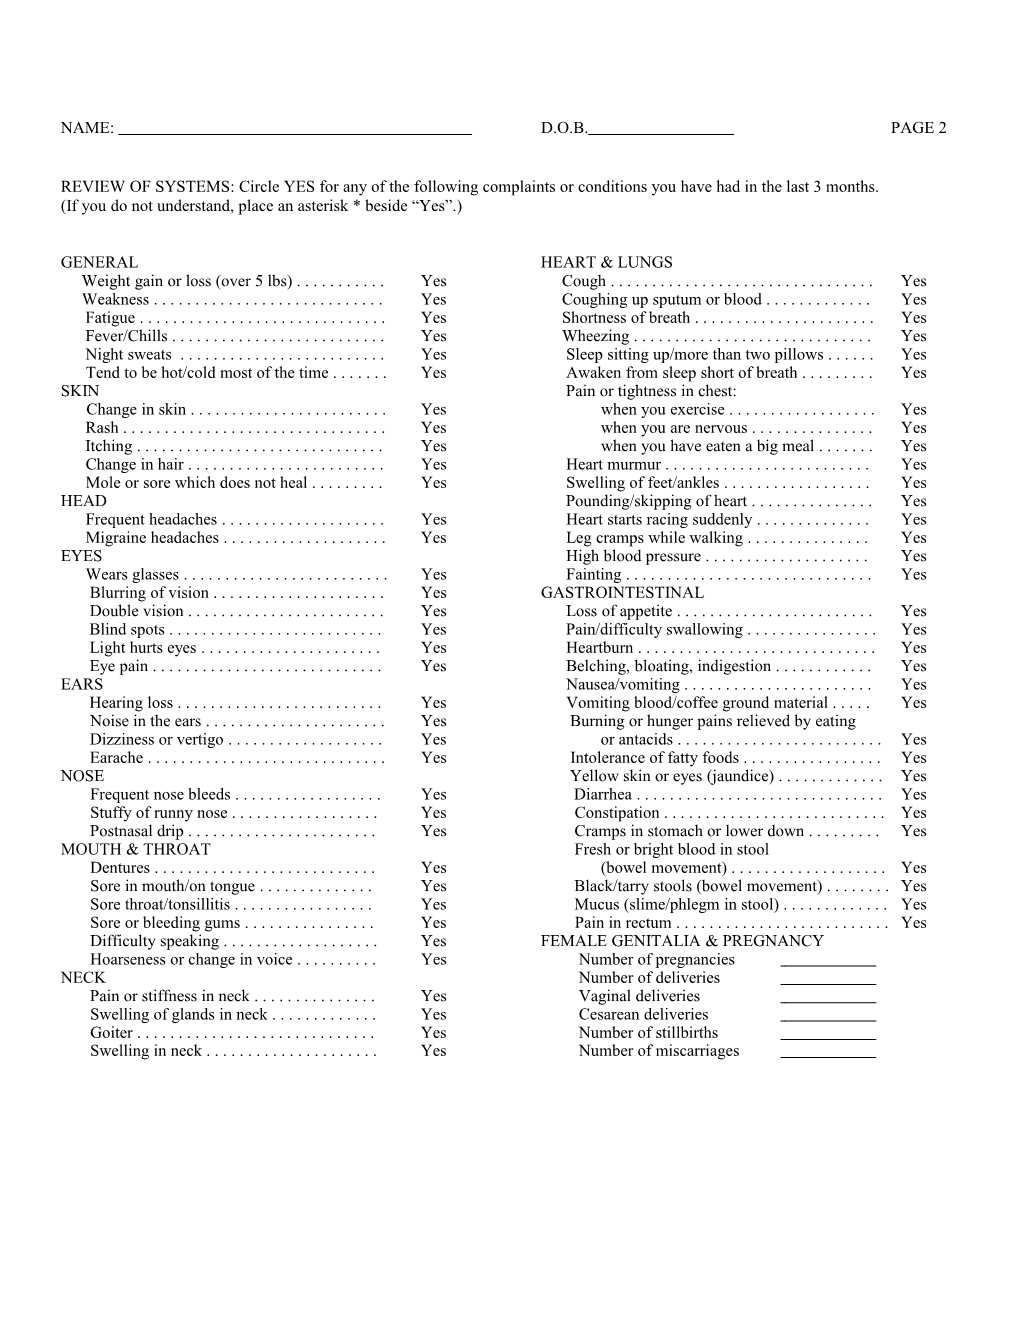 Patient S History and Health Questionnaire